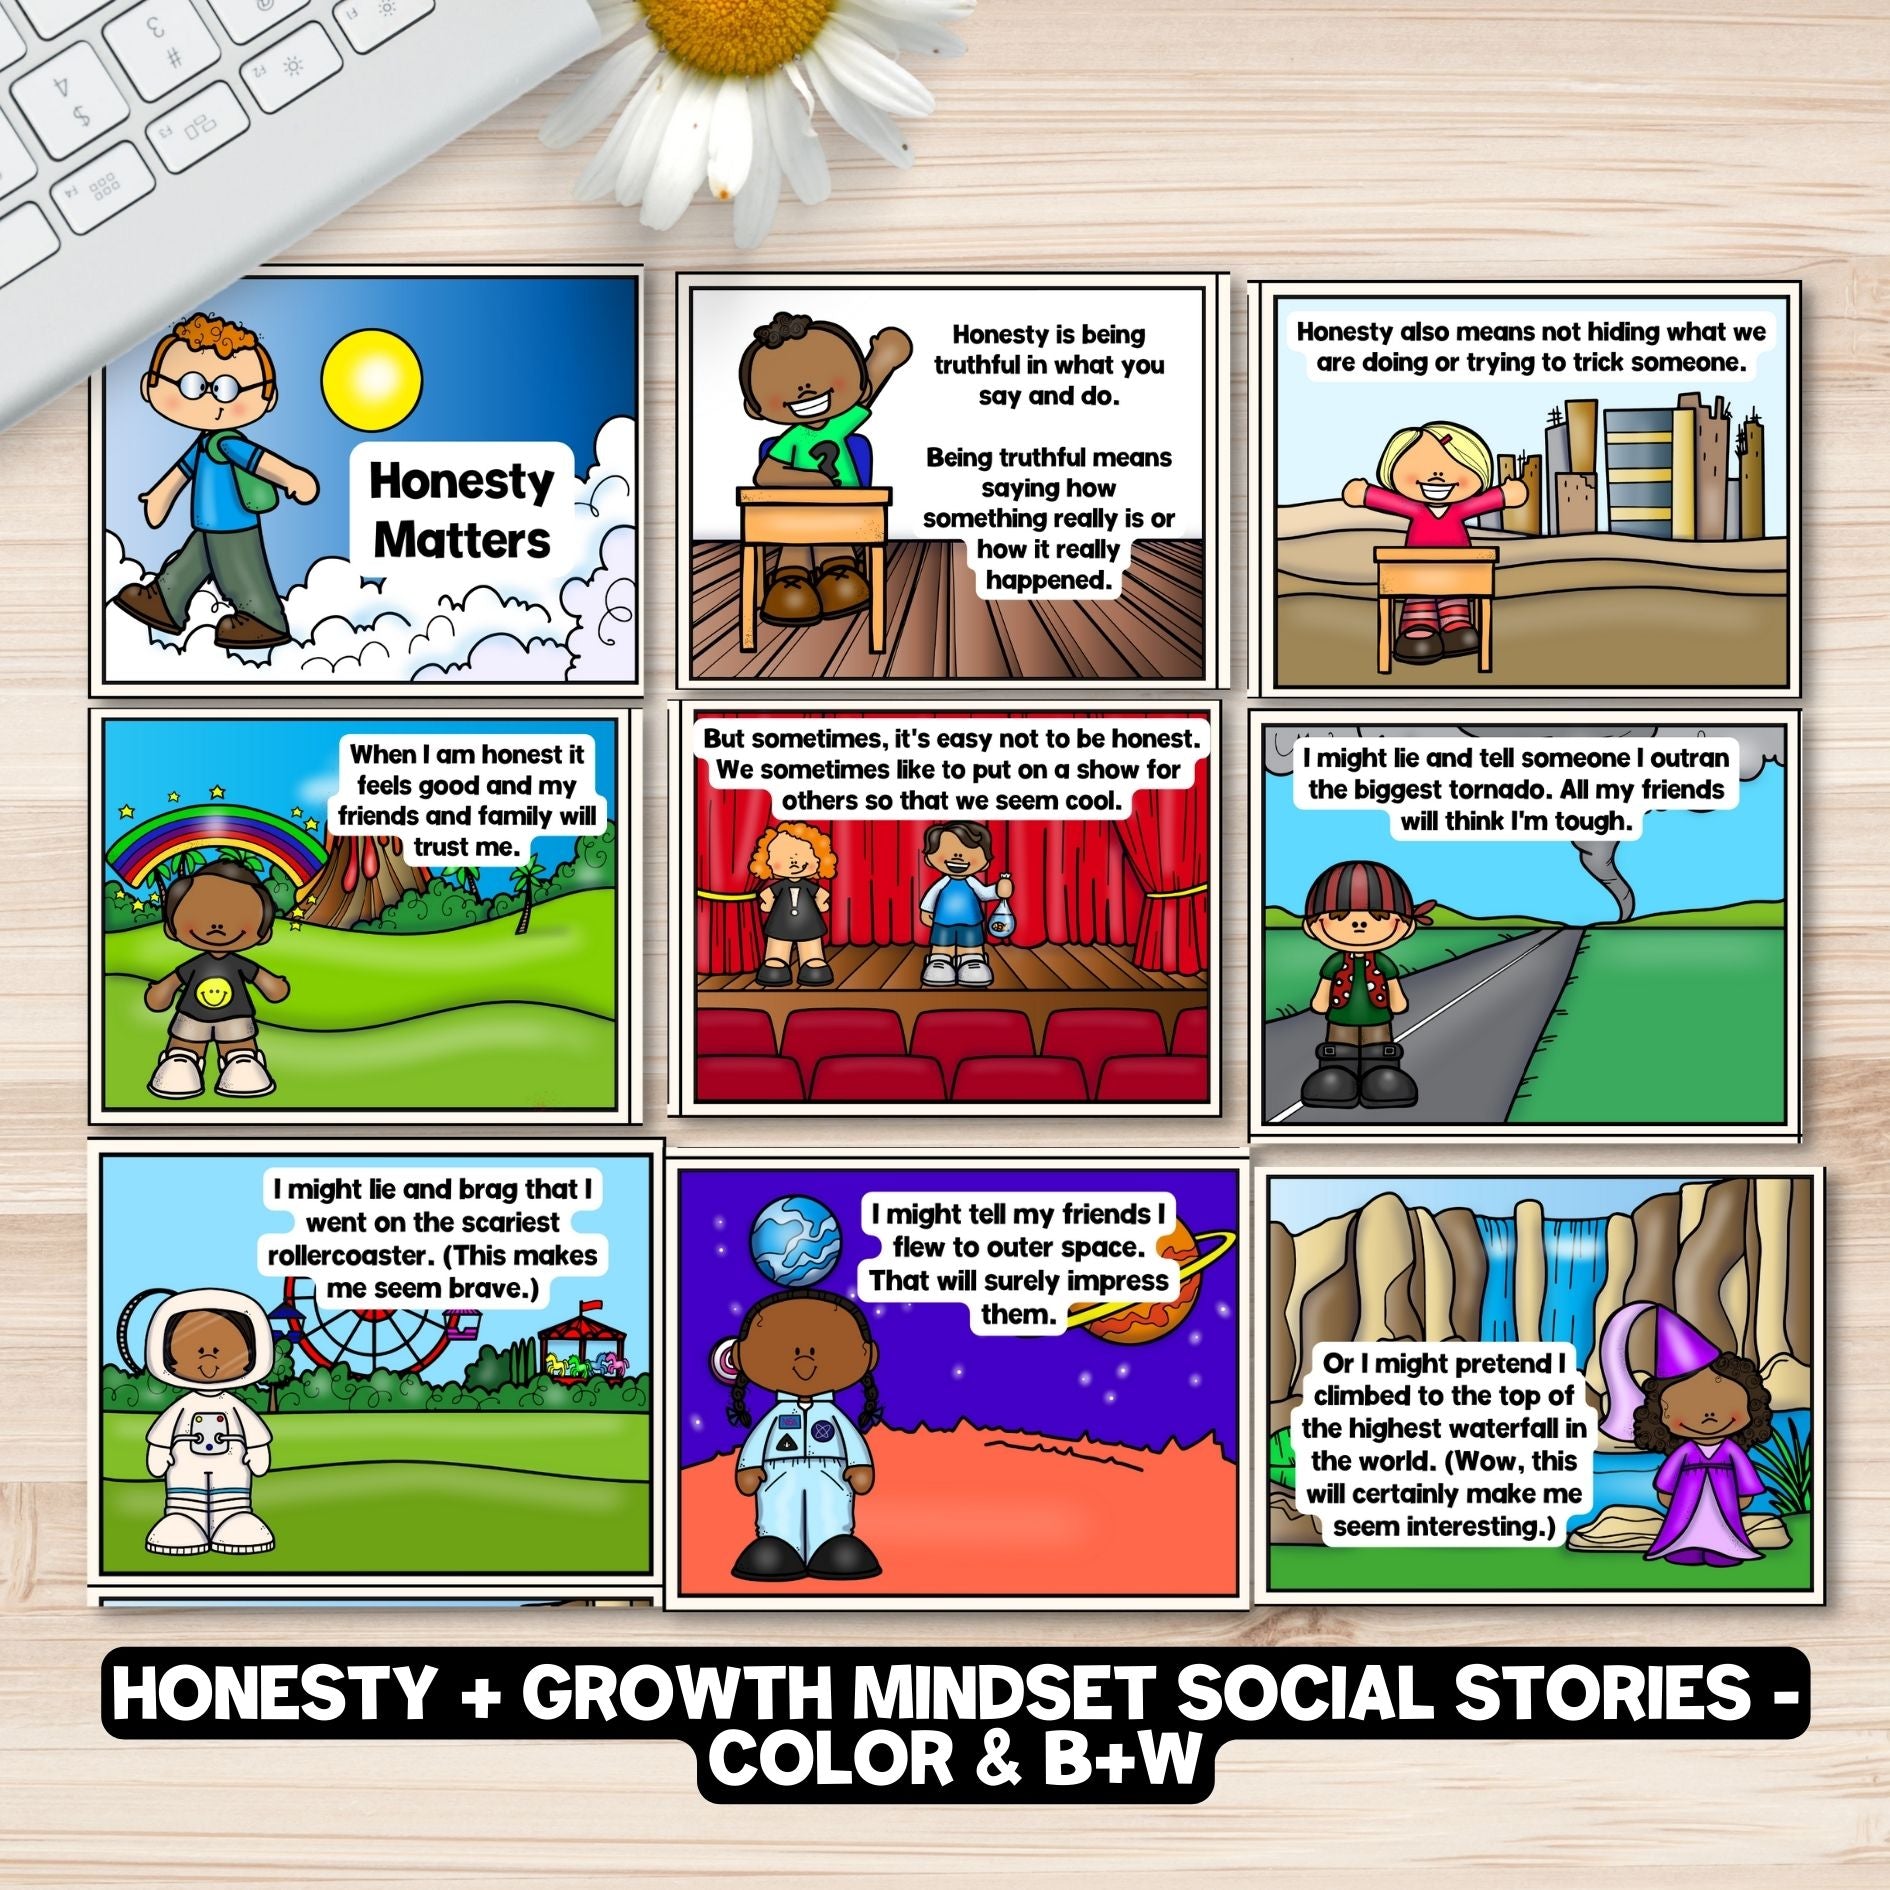 Growth Mindset Social Emotional Learning Unit (ages 3 - 8)